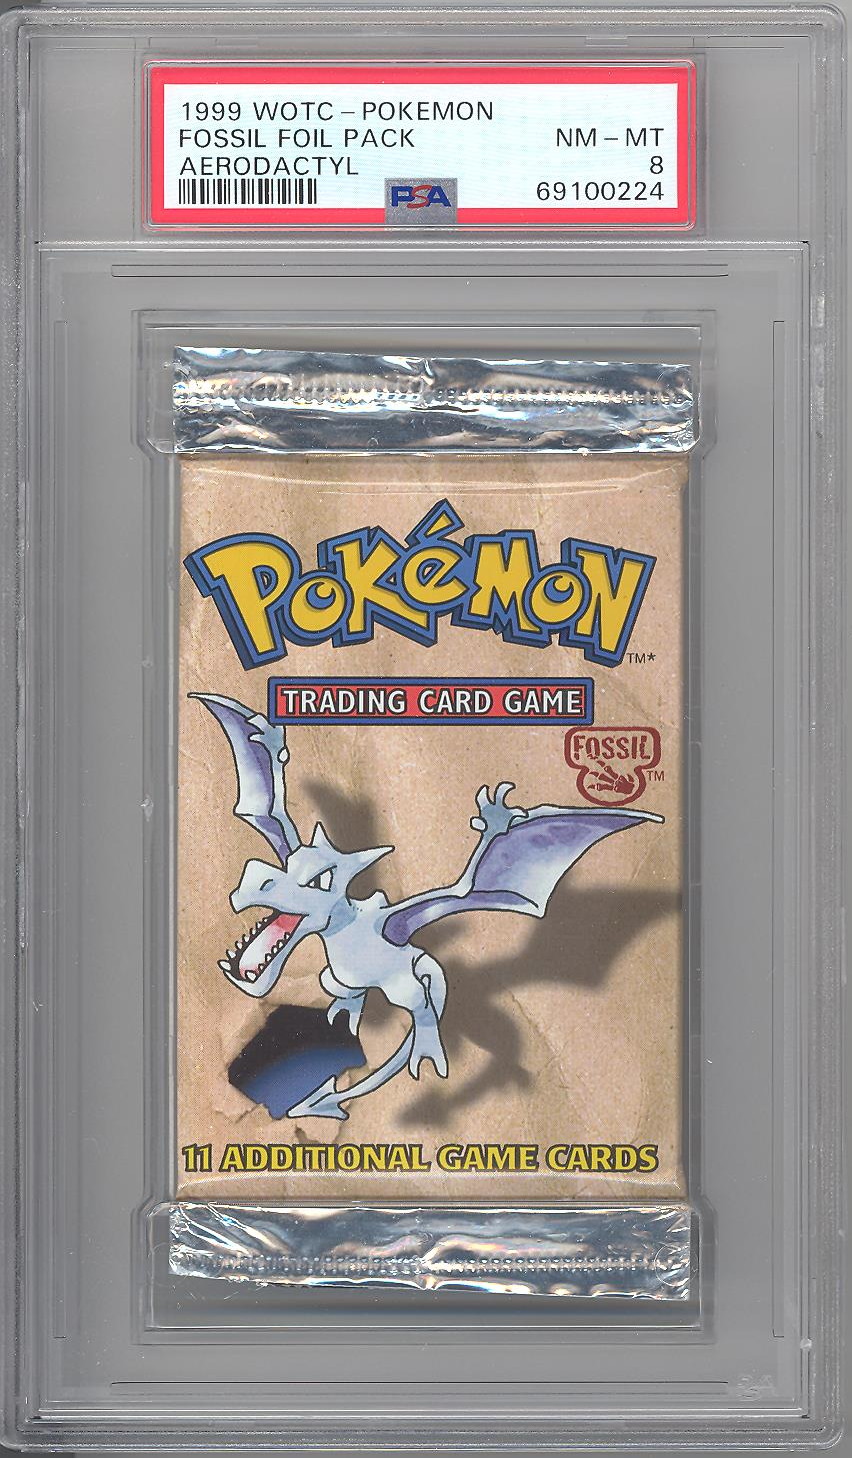 Pokemon Fossil Unlimited Booster Pack - Aerodactyl Artwork